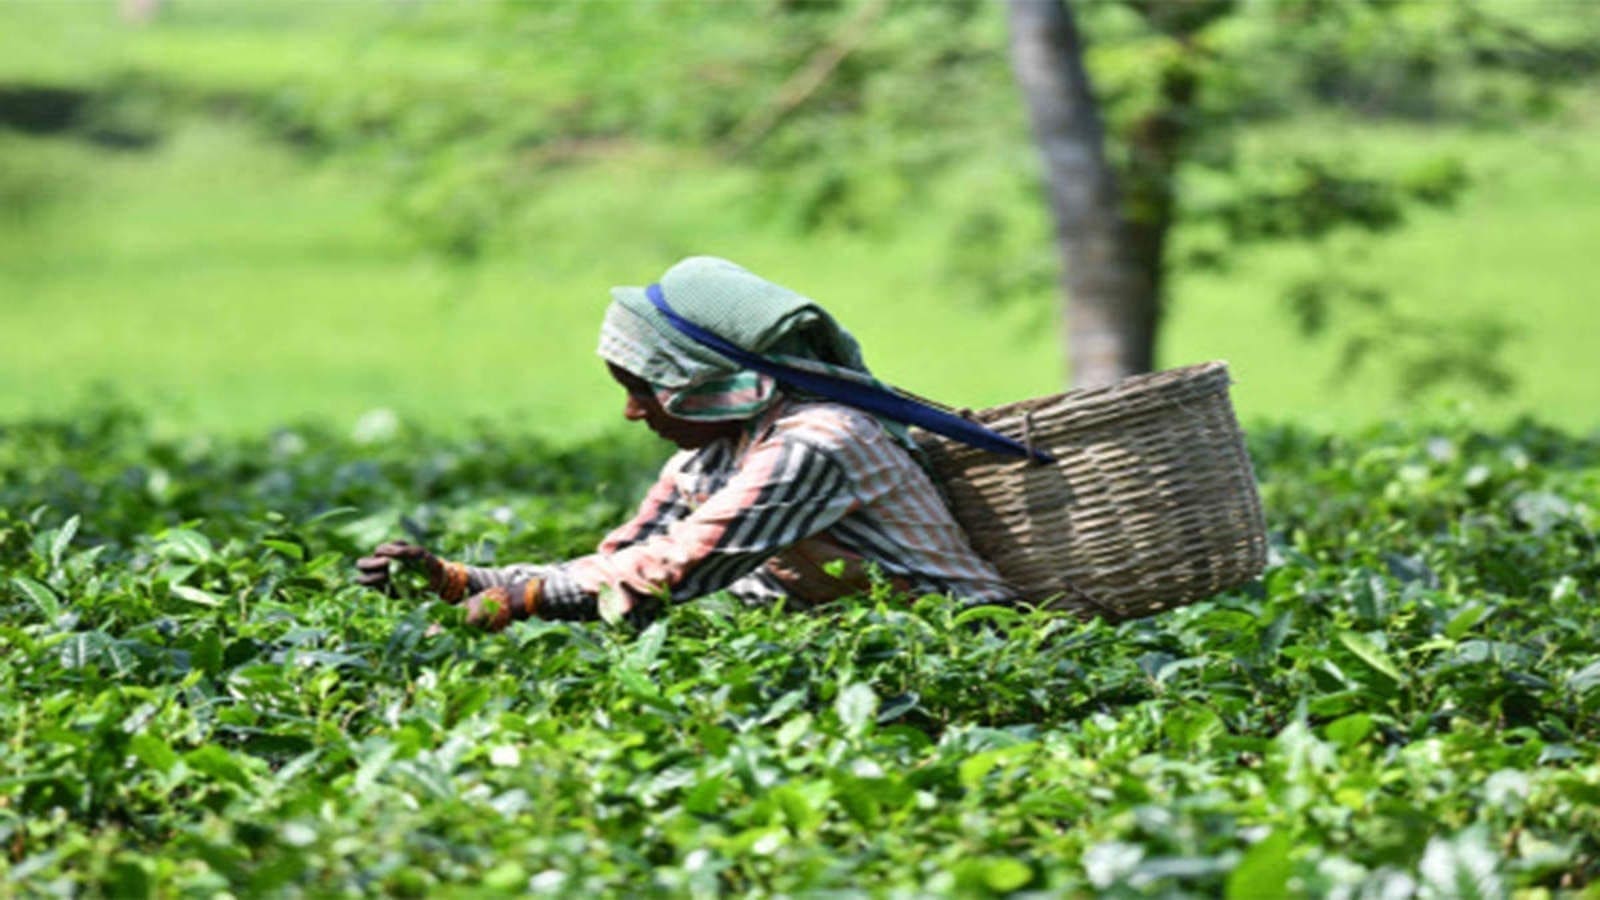 Boon for Kenyan tea farmers as tea agency disburses US$44.5m for green leaf deliveries